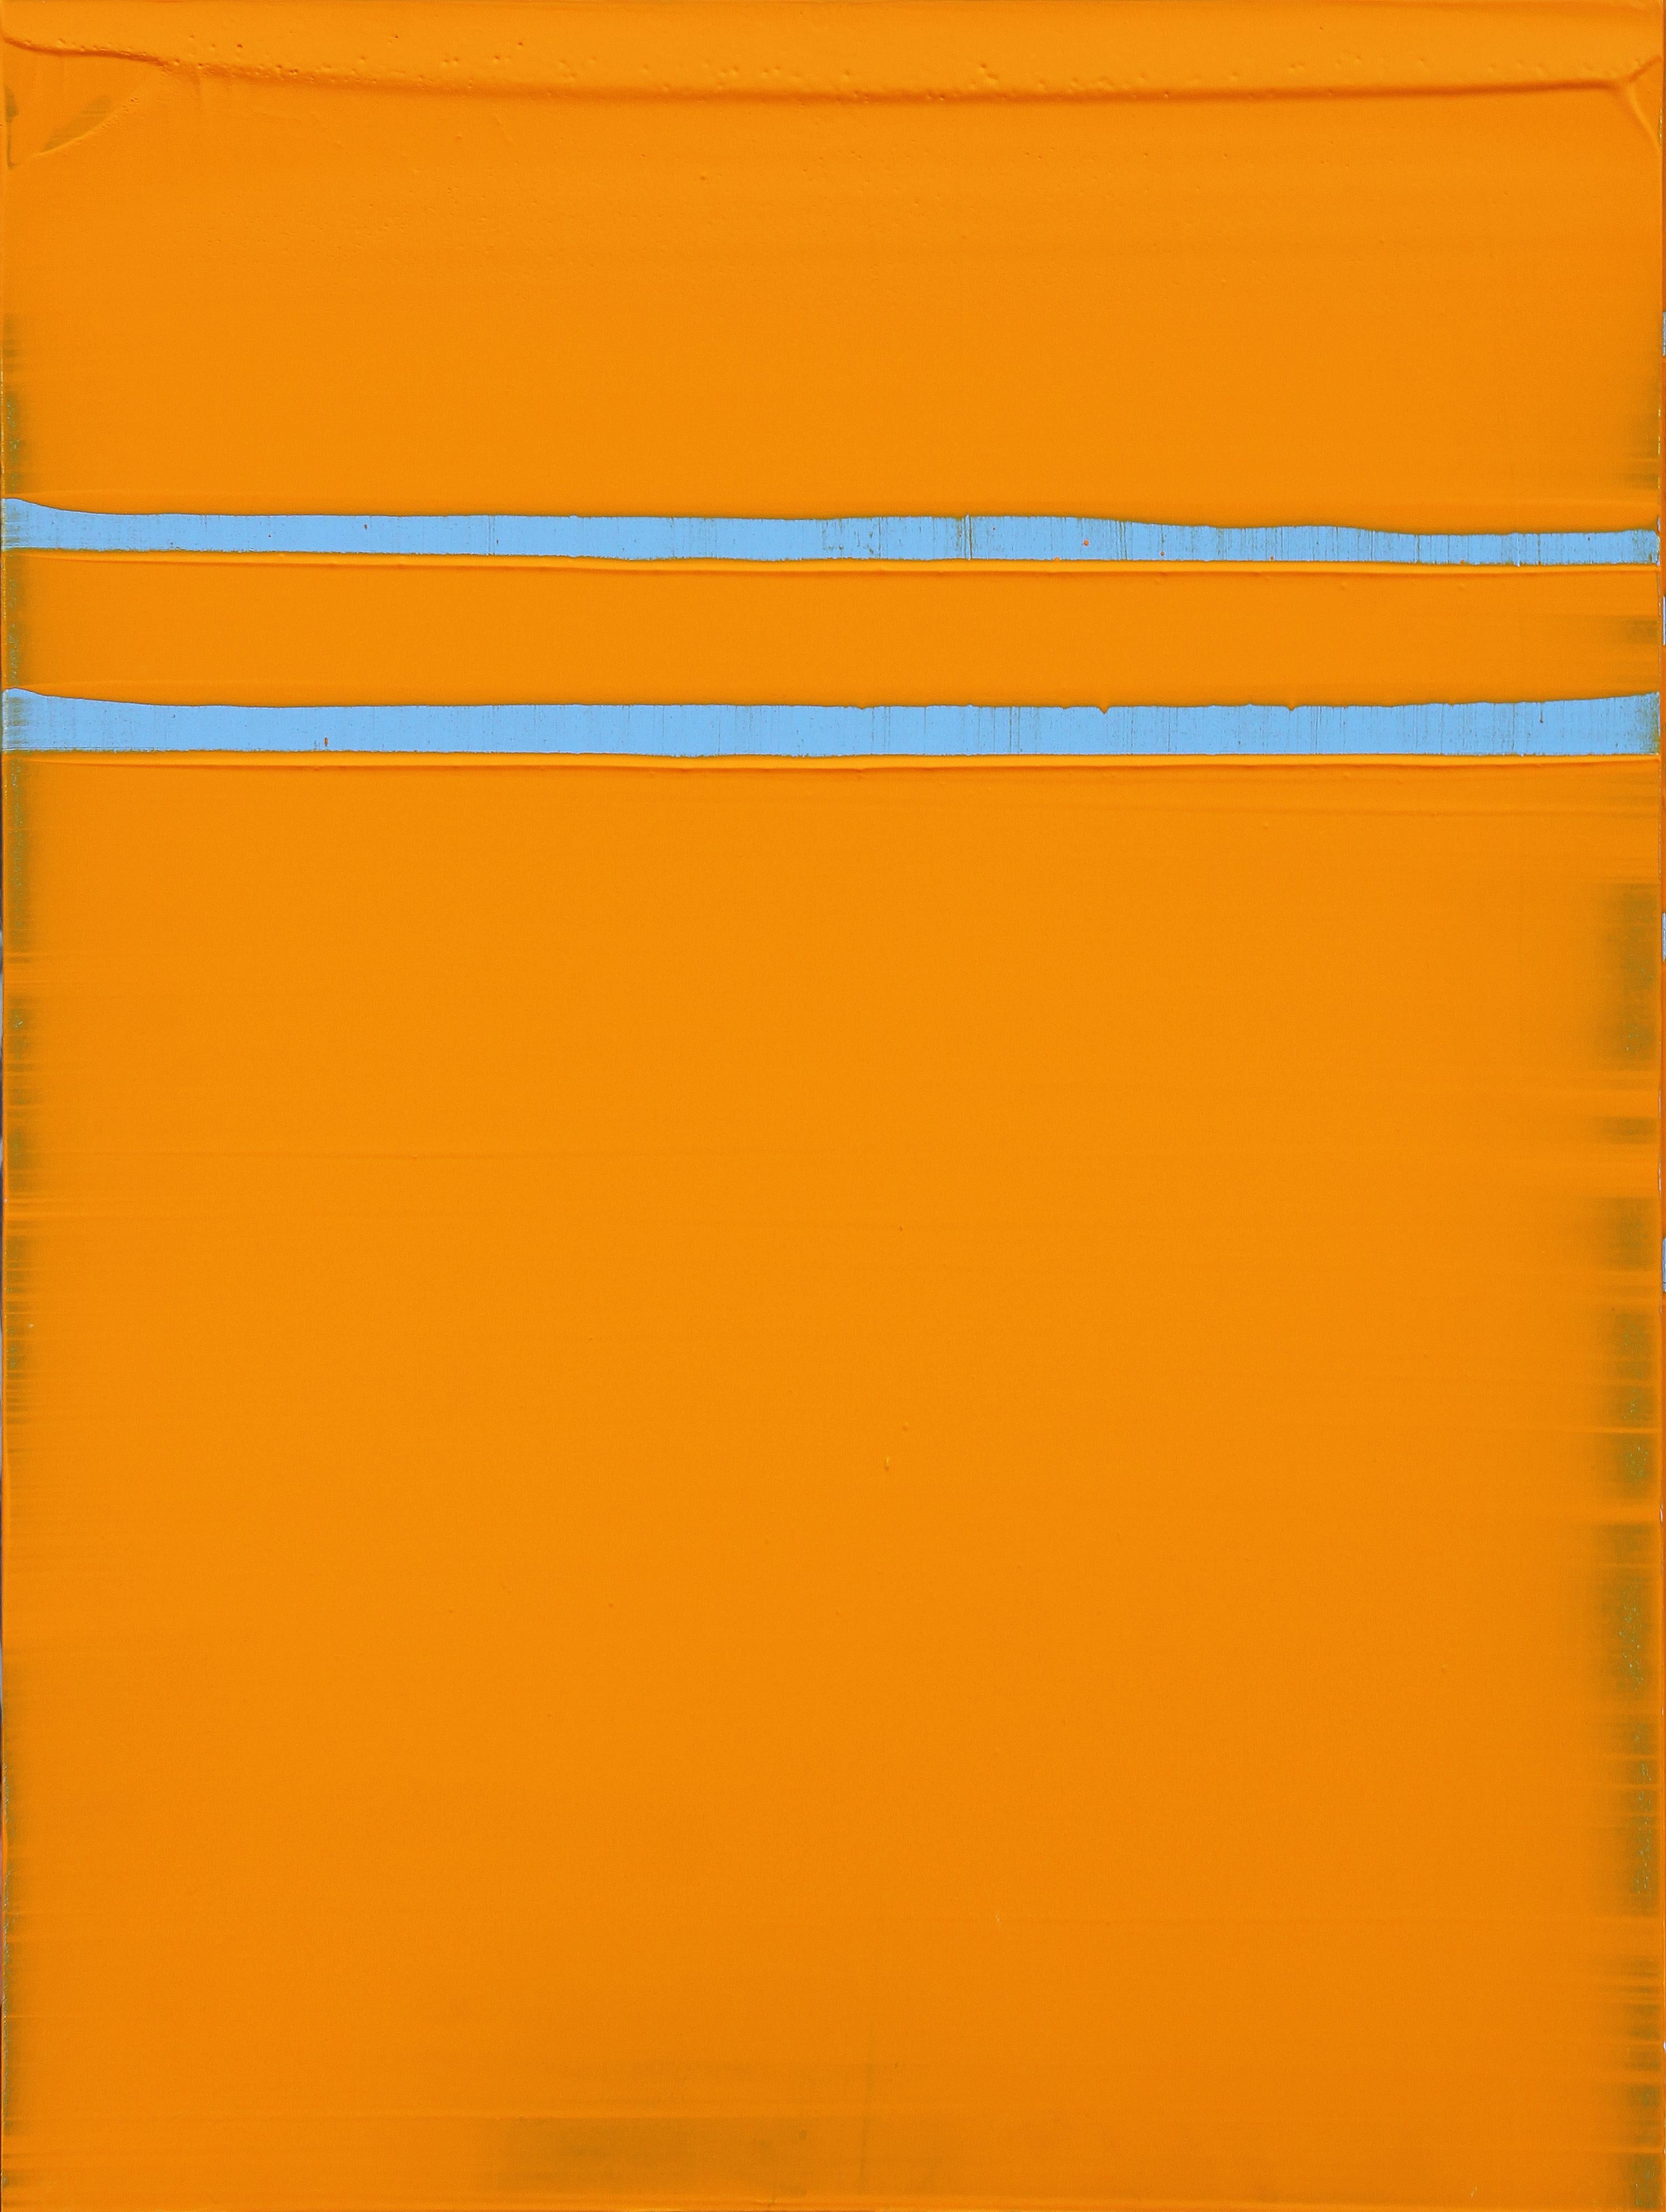 John Zinsser Abstract Painting - “Pittsburgh Series II” Orange & Blue Minimal Abstract Contemporary Painting